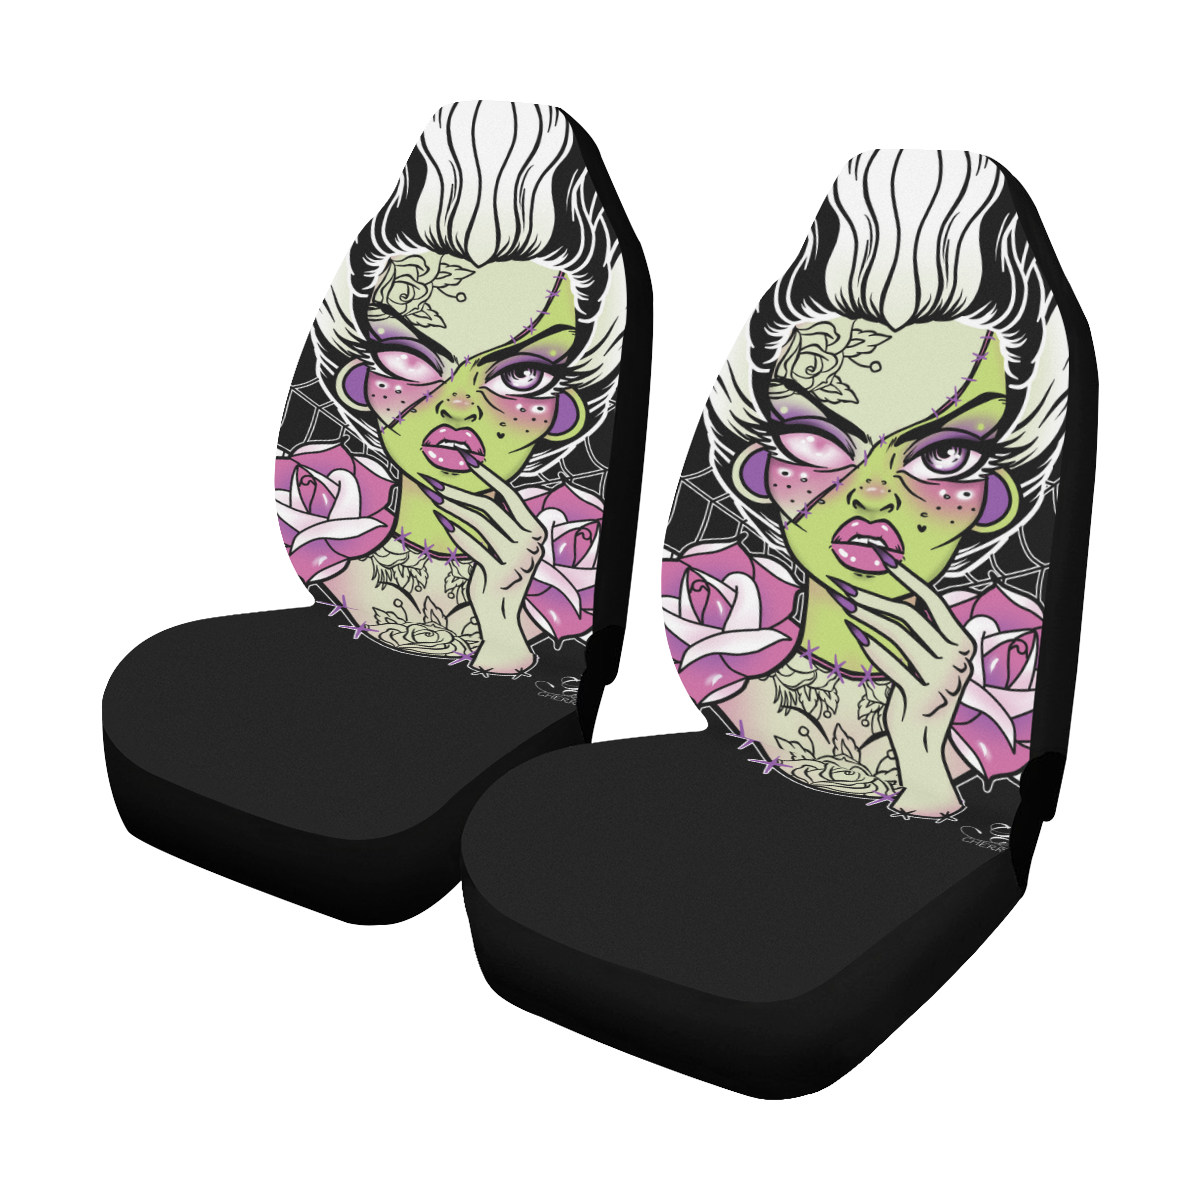 Bride of Frankenstein Seat Covers Car Seat Covers (Set of 2)